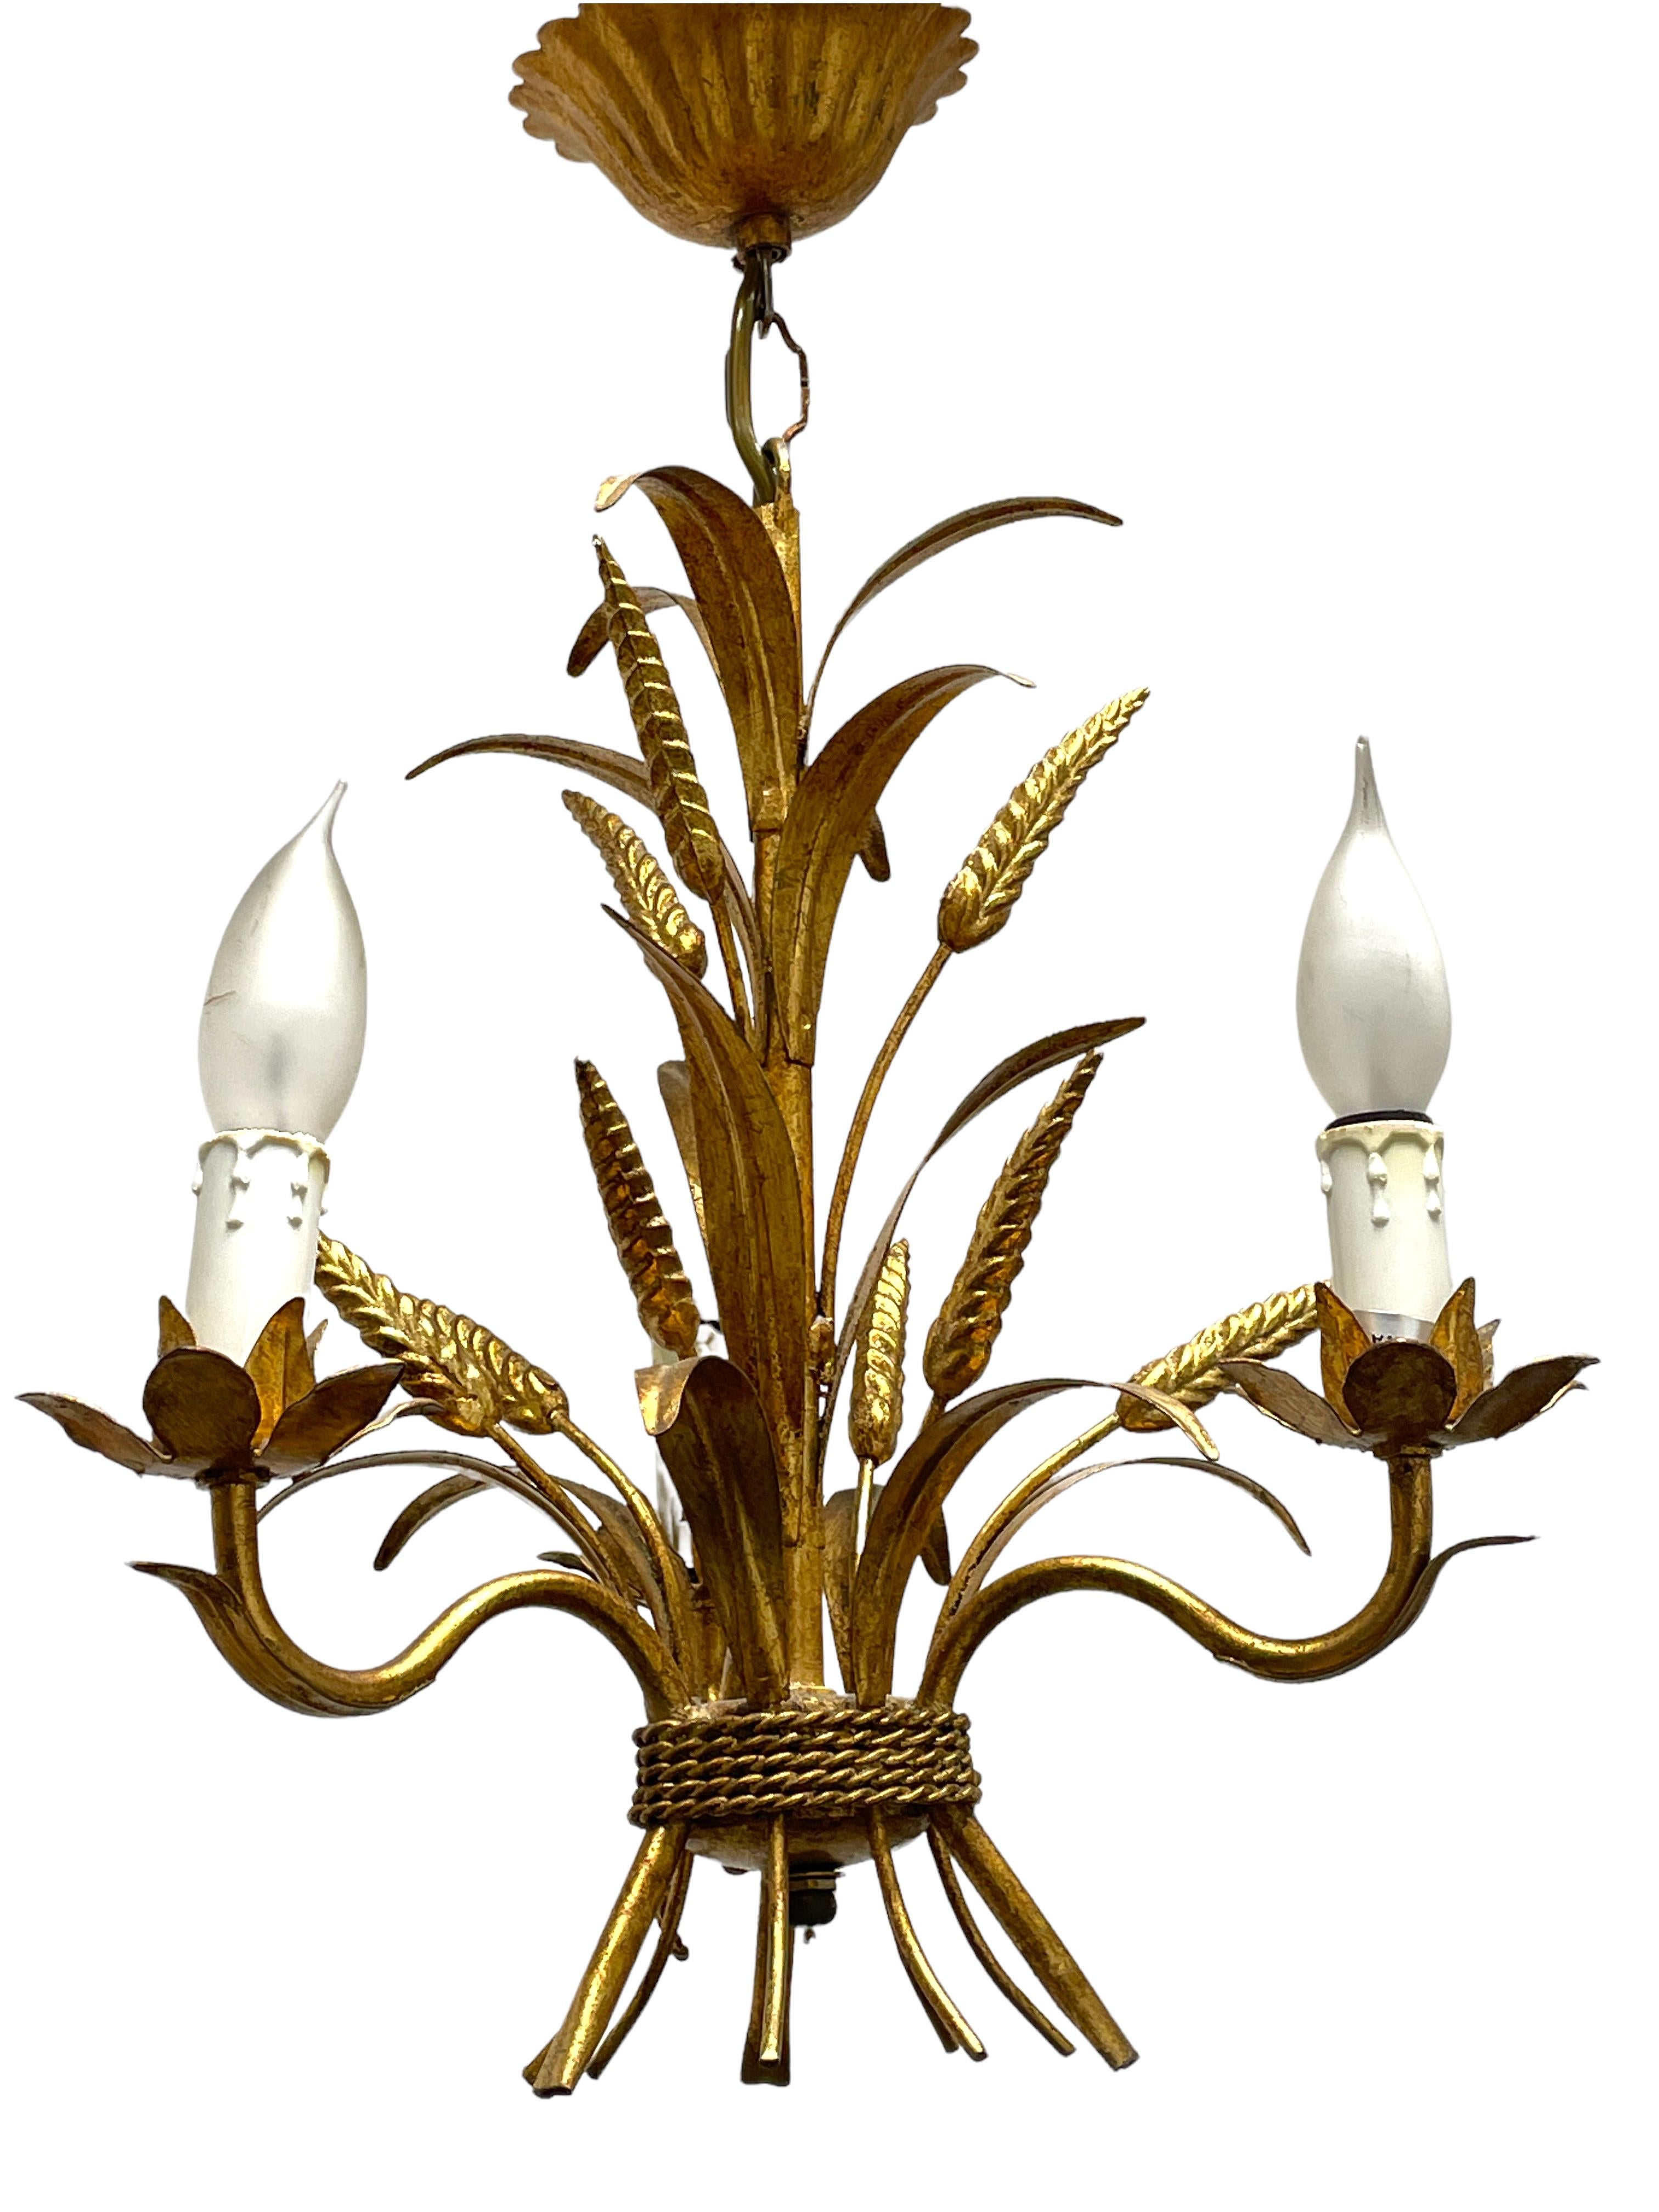 A Hollywood Regency midcentury gilt tole wheat sheaf chandelier in Coco Chanel Style, the fixture requires three European E14 candelabra bulbs, each bulb up to 40 watts. This light has a beautiful patina and gives each room an eclectic statement.